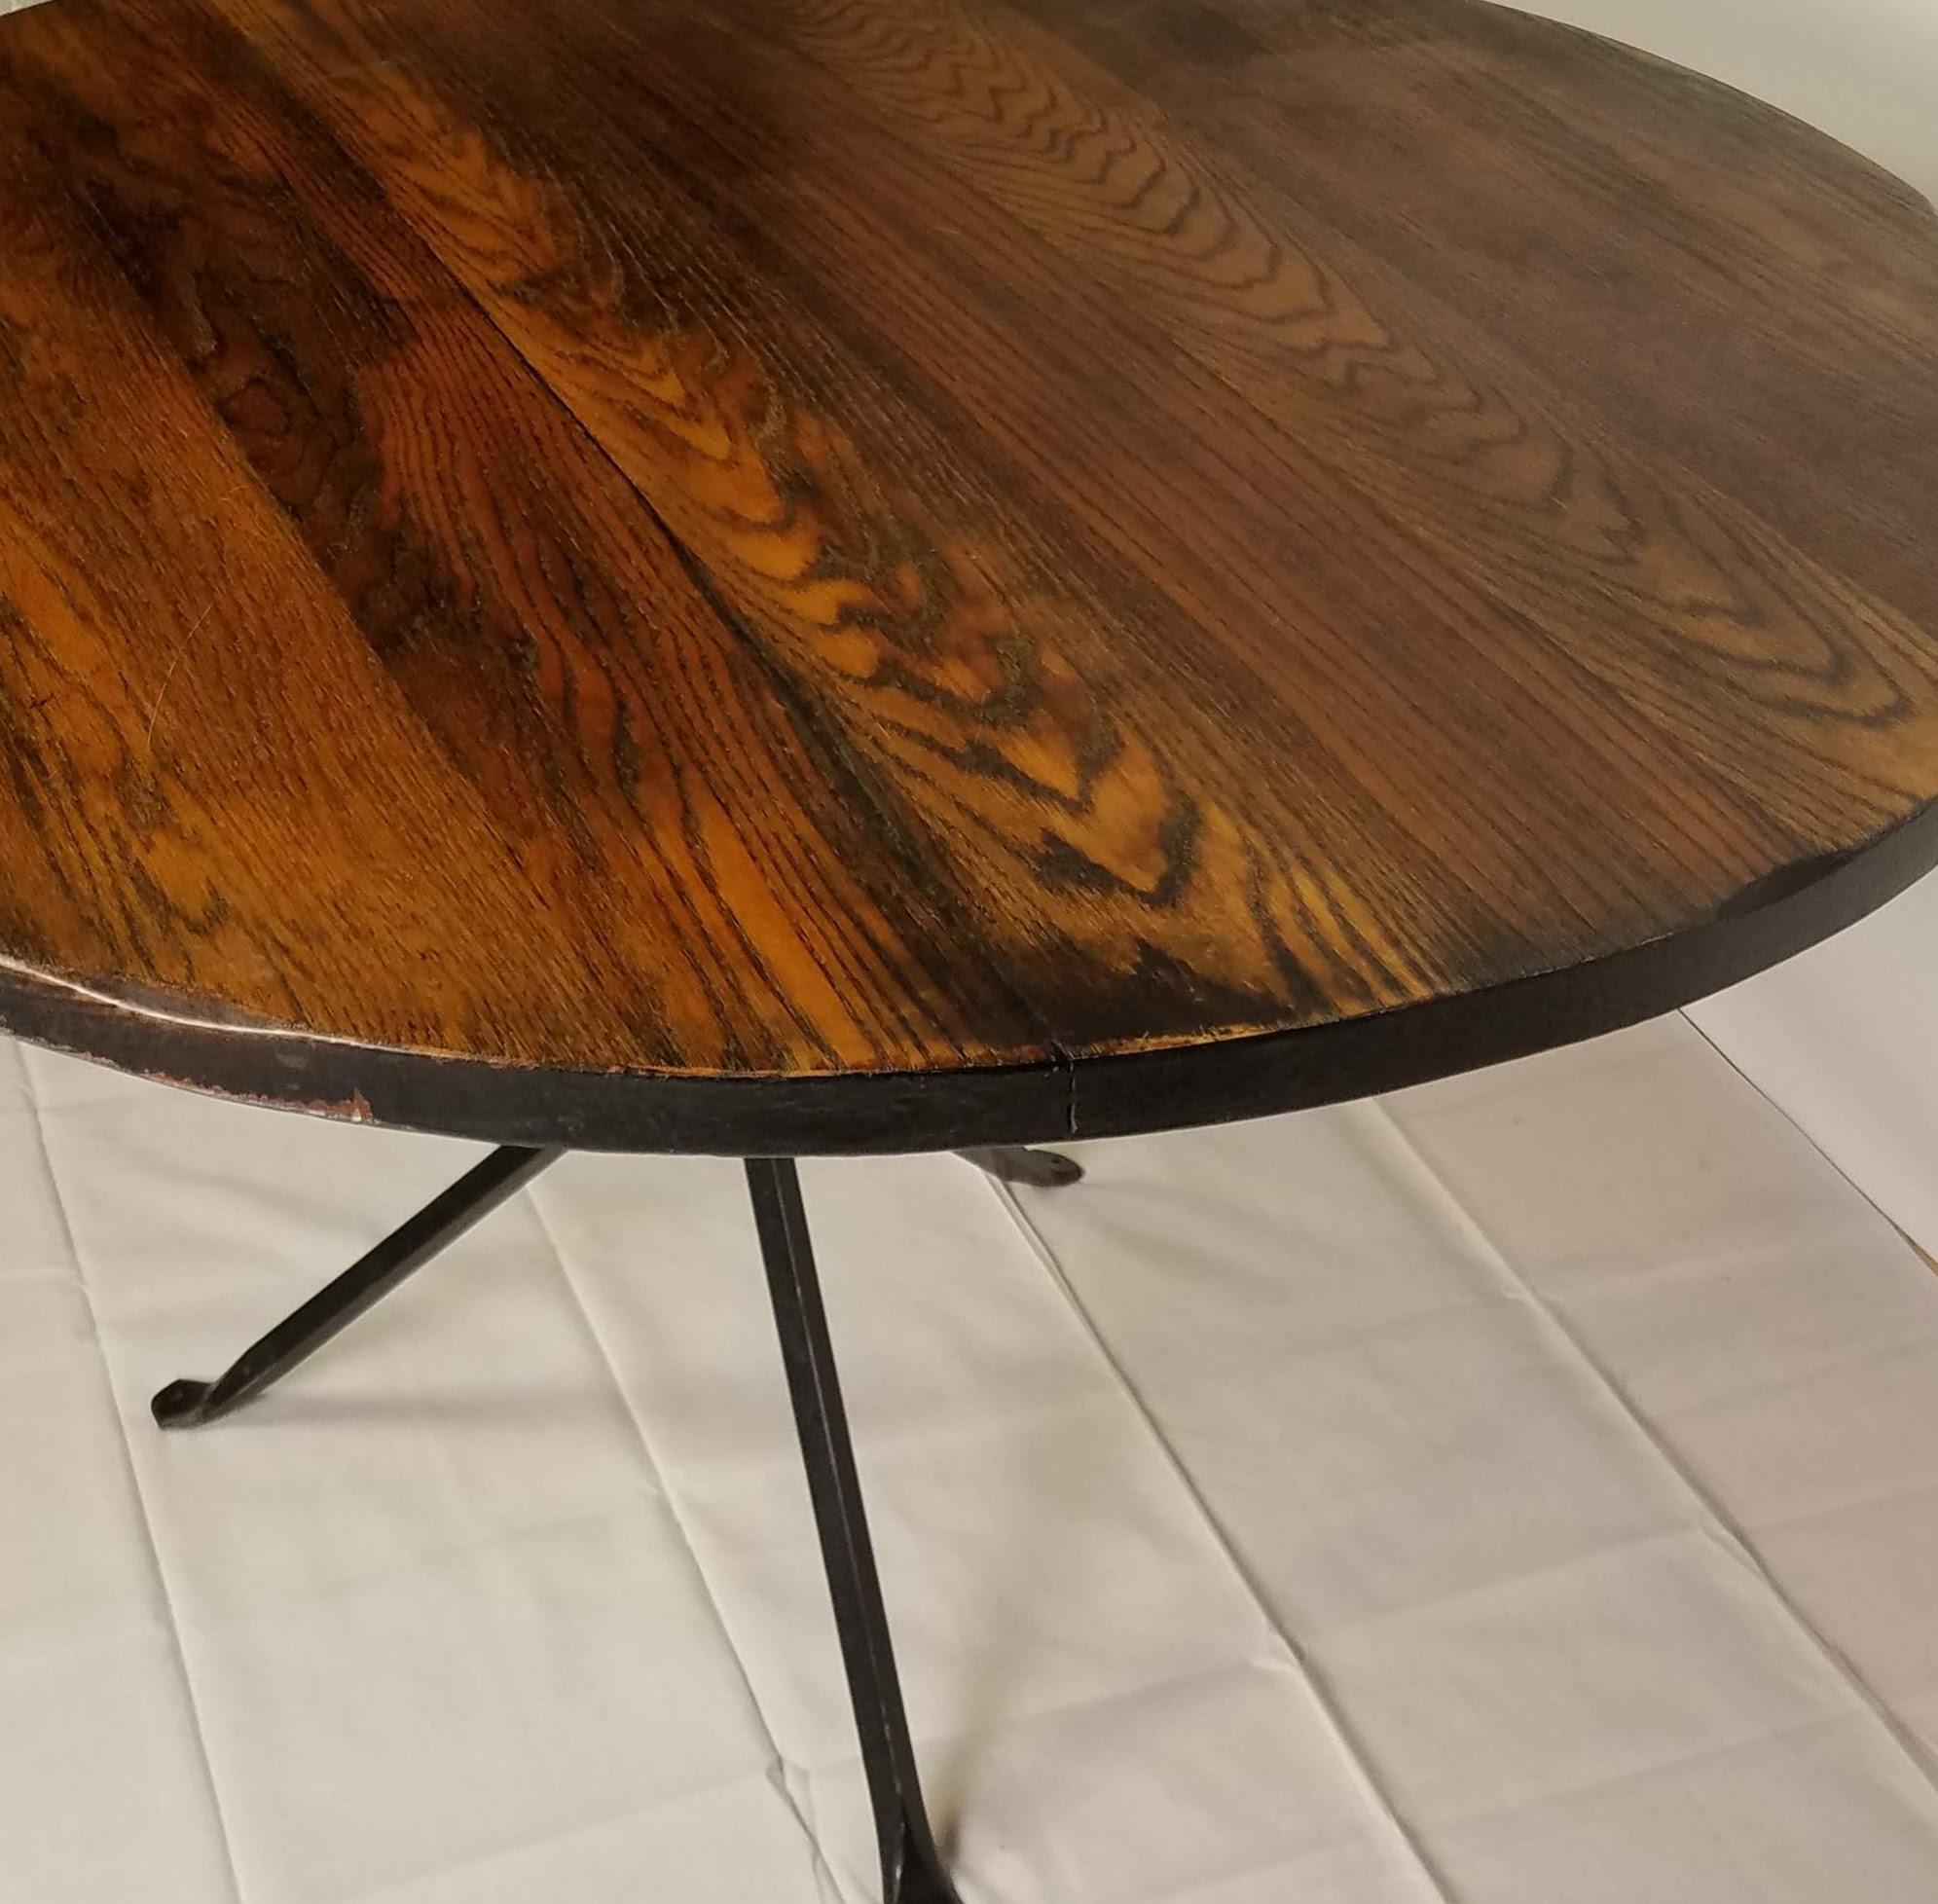 Mid-Century Modern Cleo Baldon Wrought Iron Round Smoked Oak Dining Table El Monte, CA. c. 1968 For Sale